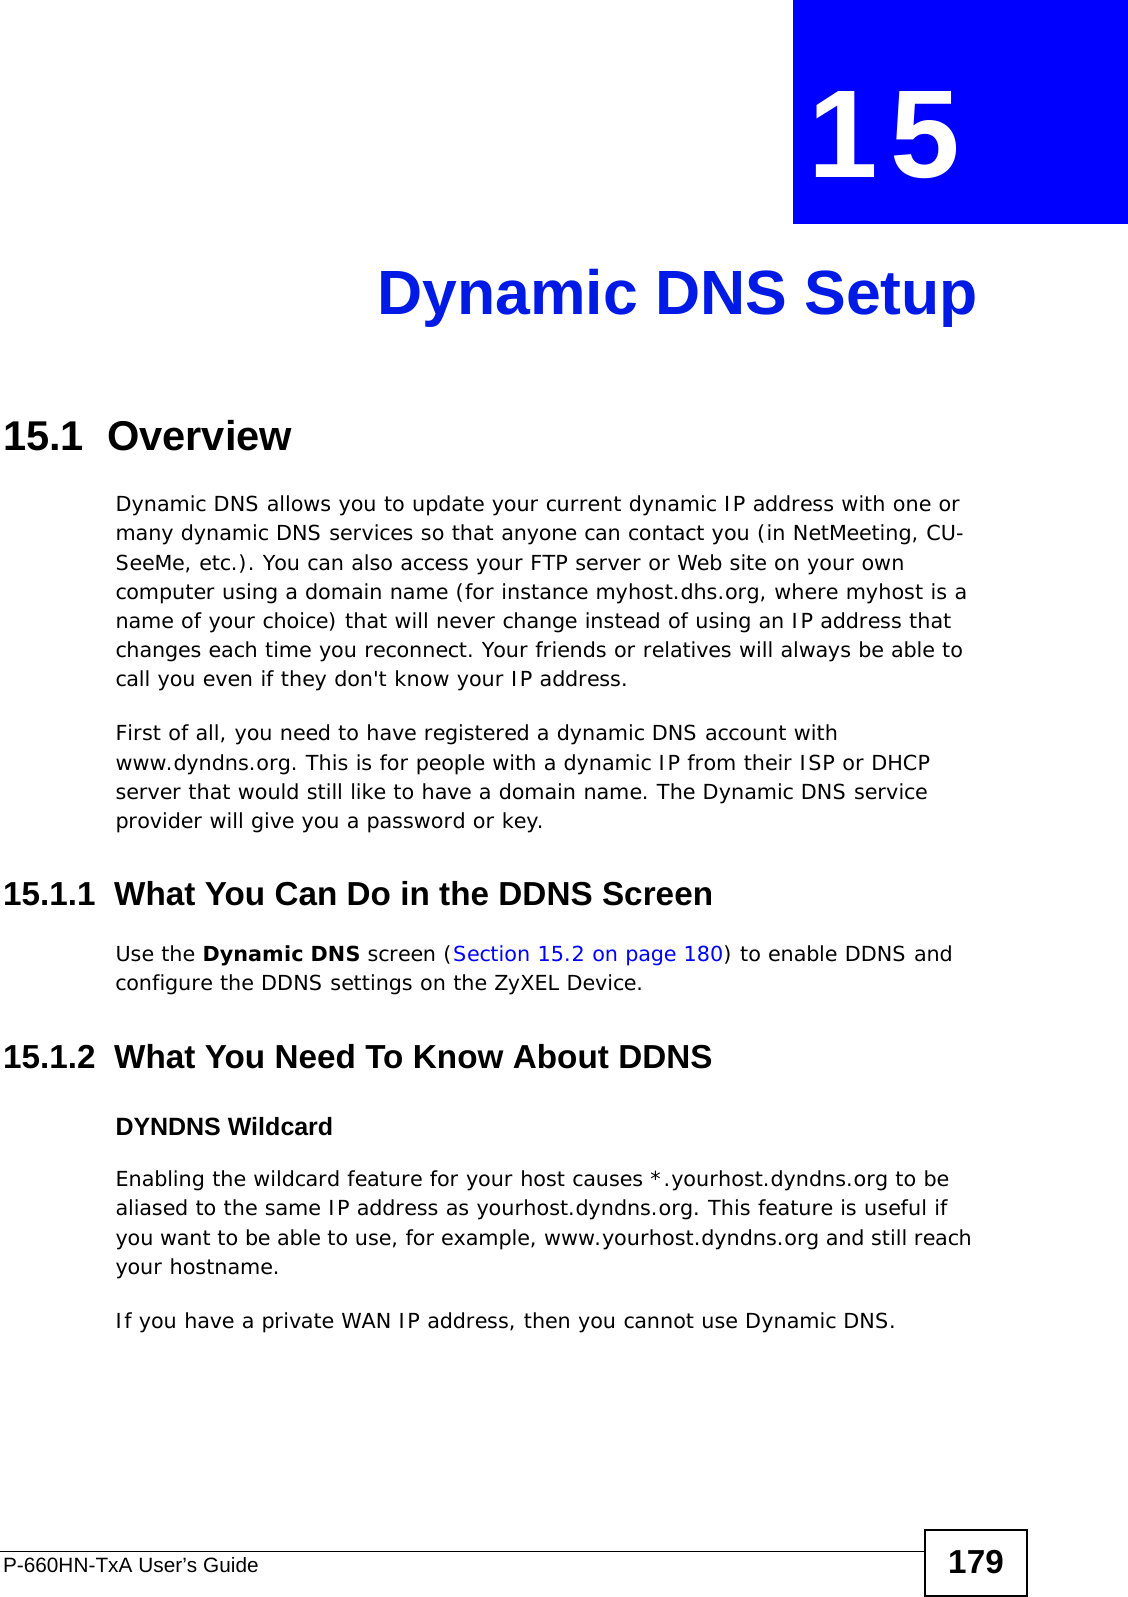 P-660HN-TxA User’s Guide 179CHAPTER  15 Dynamic DNS Setup15.1  Overview Dynamic DNS allows you to update your current dynamic IP address with one or many dynamic DNS services so that anyone can contact you (in NetMeeting, CU-SeeMe, etc.). You can also access your FTP server or Web site on your own computer using a domain name (for instance myhost.dhs.org, where myhost is a name of your choice) that will never change instead of using an IP address that changes each time you reconnect. Your friends or relatives will always be able to call you even if they don&apos;t know your IP address.First of all, you need to have registered a dynamic DNS account with www.dyndns.org. This is for people with a dynamic IP from their ISP or DHCP server that would still like to have a domain name. The Dynamic DNS service provider will give you a password or key. 15.1.1  What You Can Do in the DDNS ScreenUse the Dynamic DNS screen (Section 15.2 on page 180) to enable DDNS and configure the DDNS settings on the ZyXEL Device.15.1.2  What You Need To Know About DDNSDYNDNS WildcardEnabling the wildcard feature for your host causes *.yourhost.dyndns.org to be aliased to the same IP address as yourhost.dyndns.org. This feature is useful if you want to be able to use, for example, www.yourhost.dyndns.org and still reach your hostname.If you have a private WAN IP address, then you cannot use Dynamic DNS.